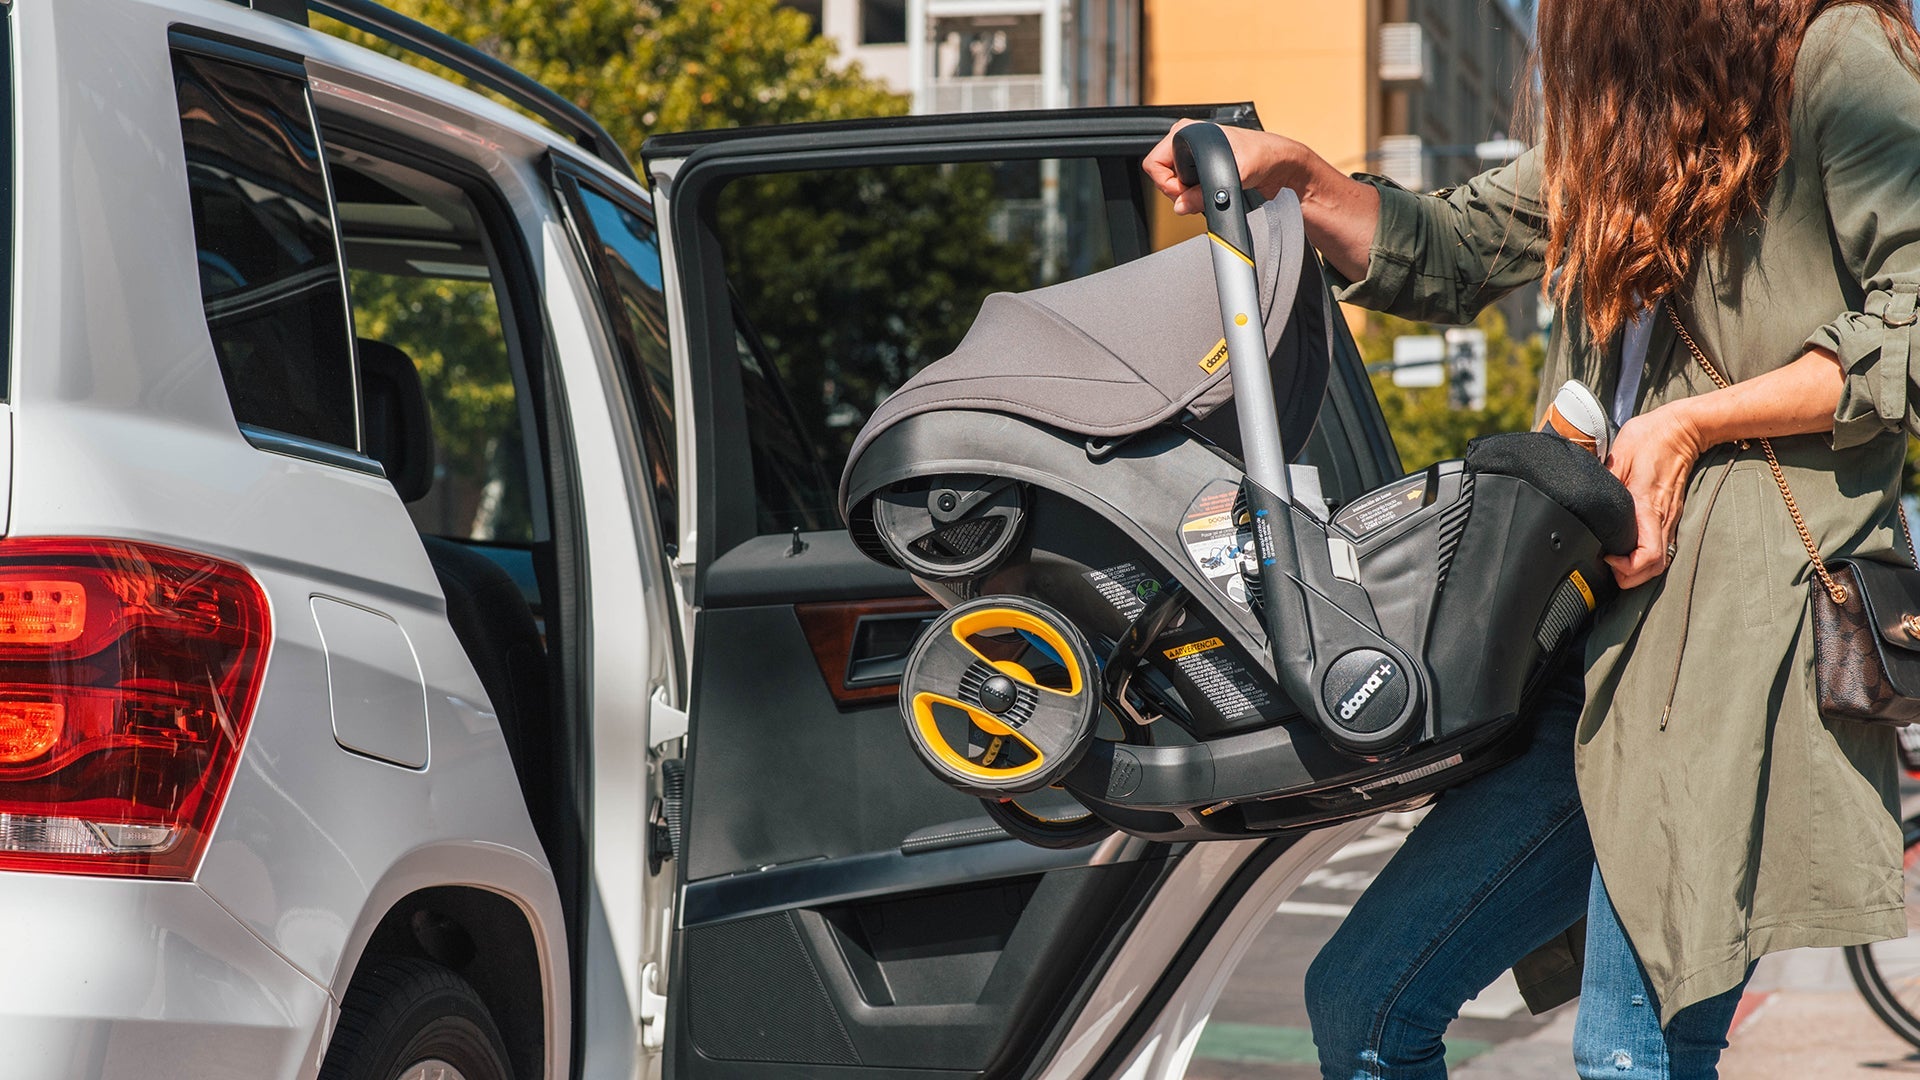 The Ultimate Guide to Choosing an Infant Safe Car Seat